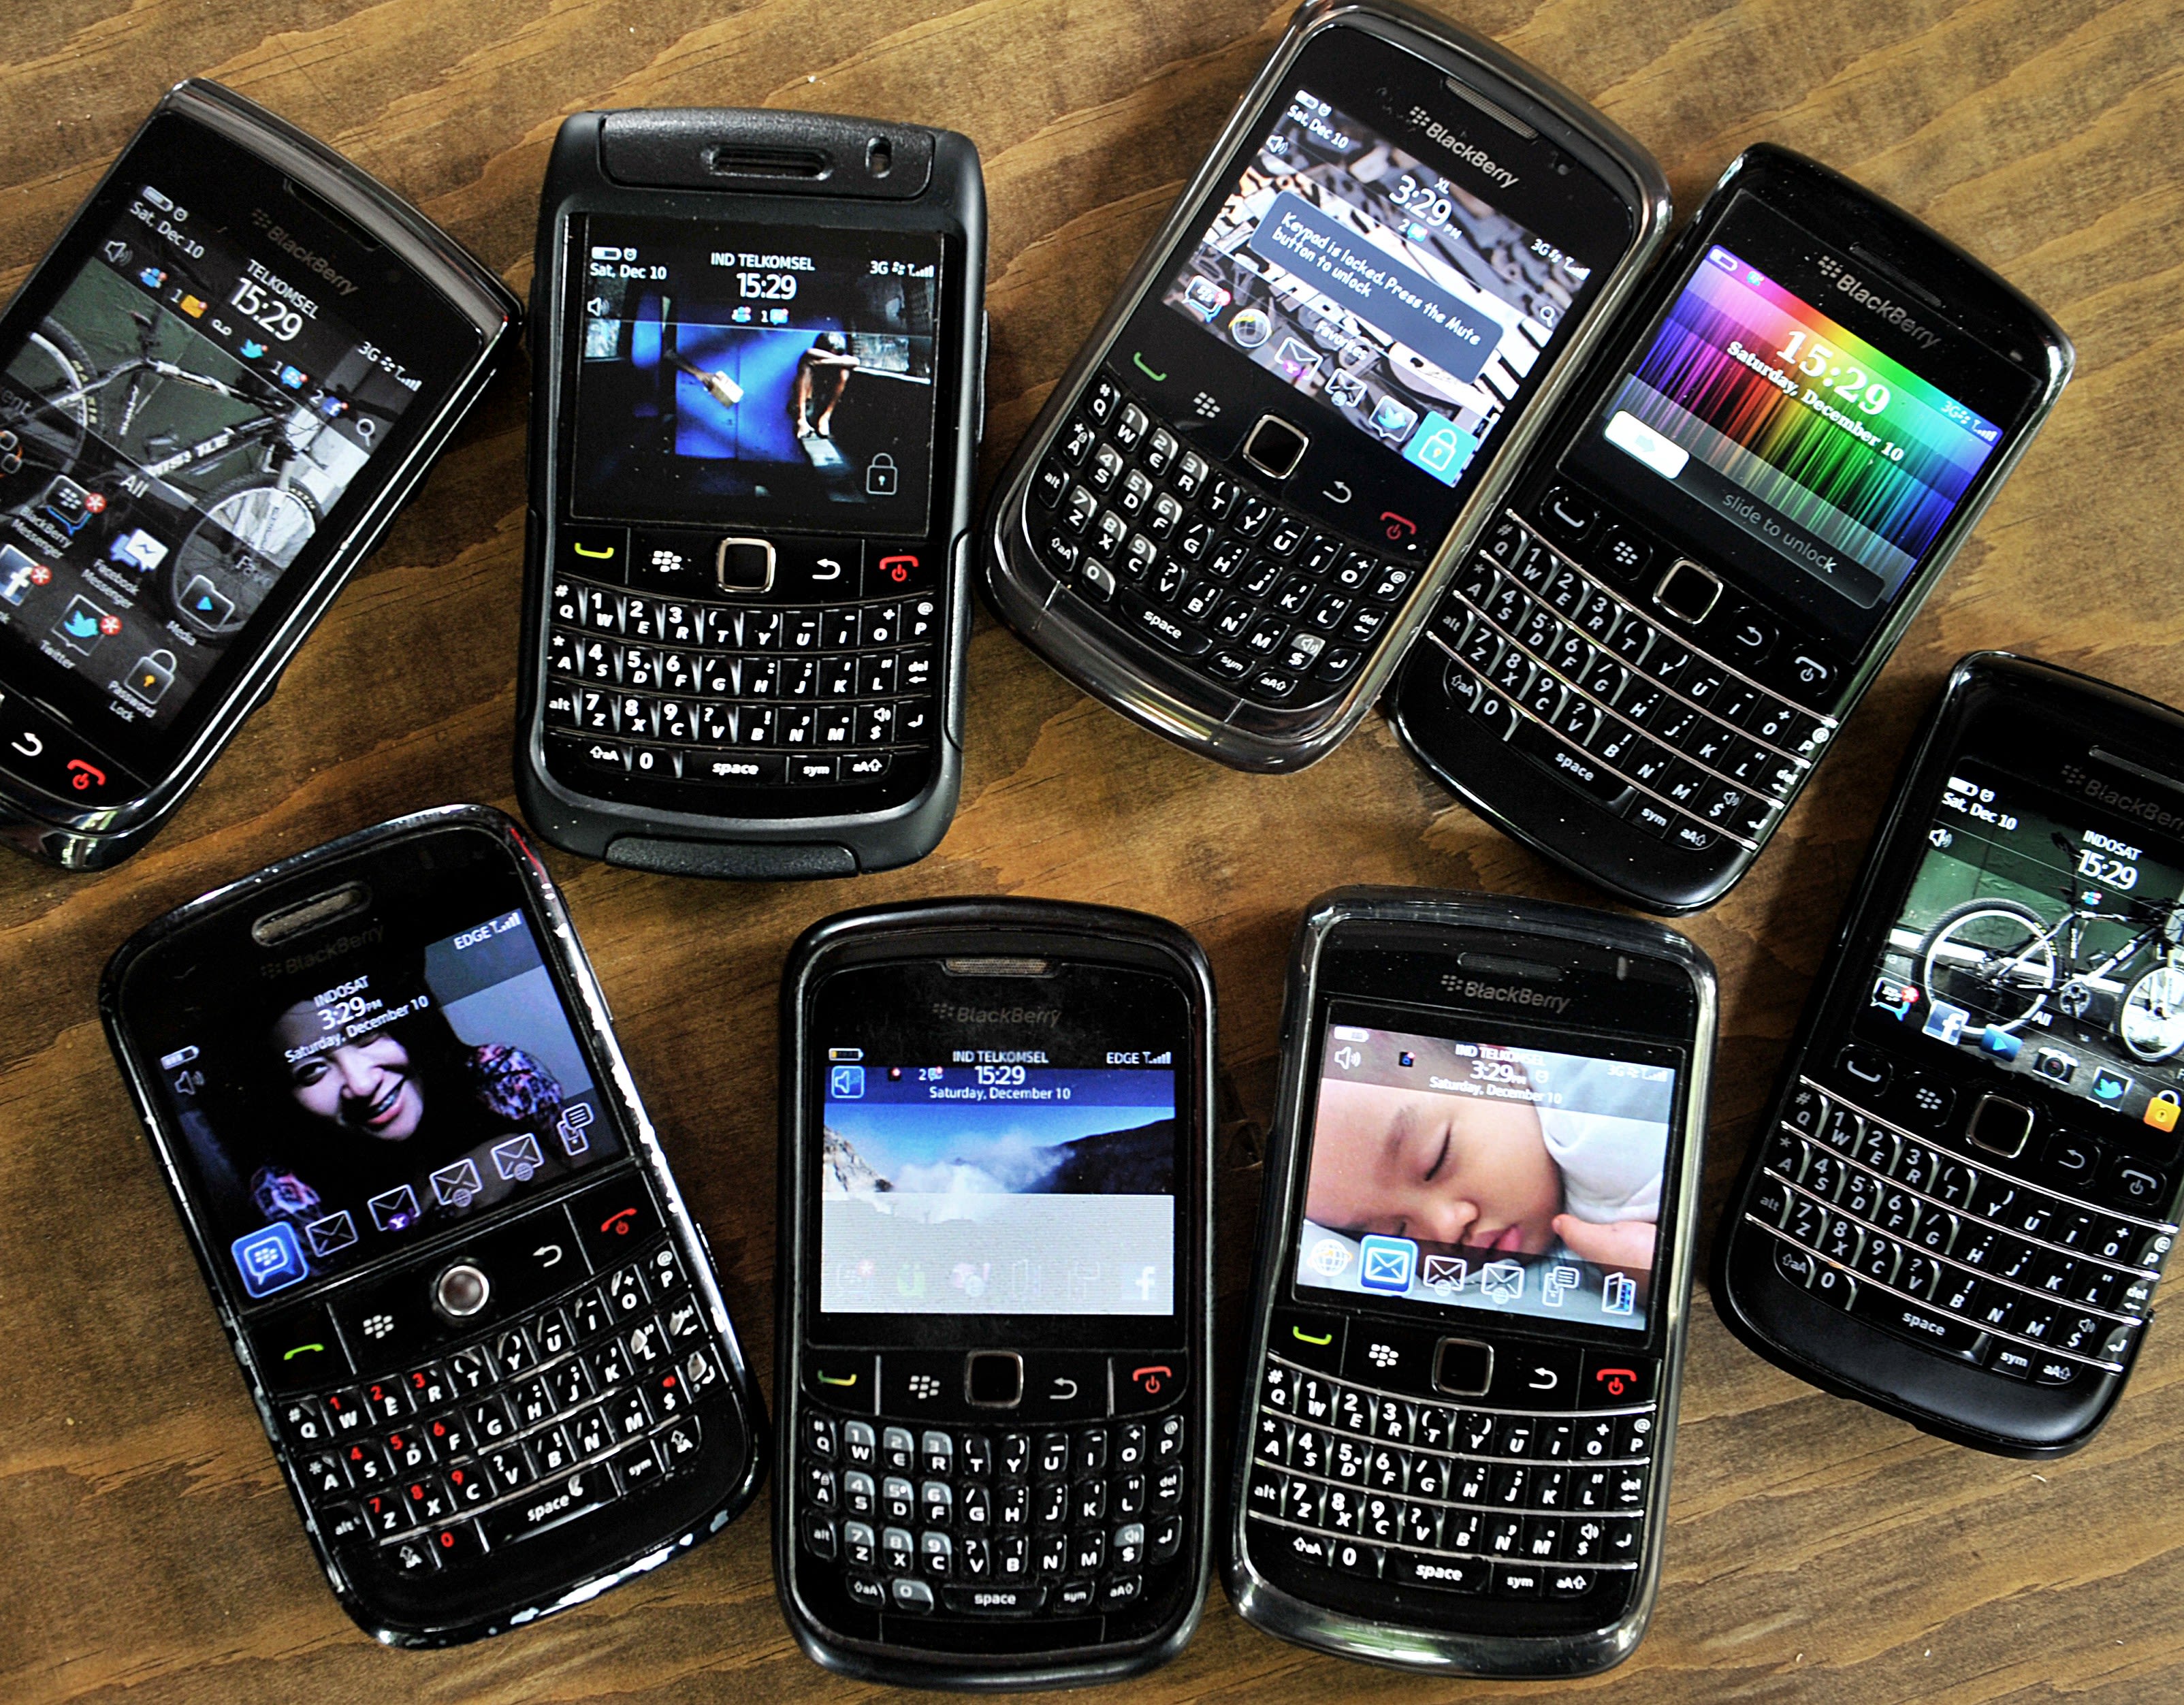 BlackBerry, Definition, History, & Facts